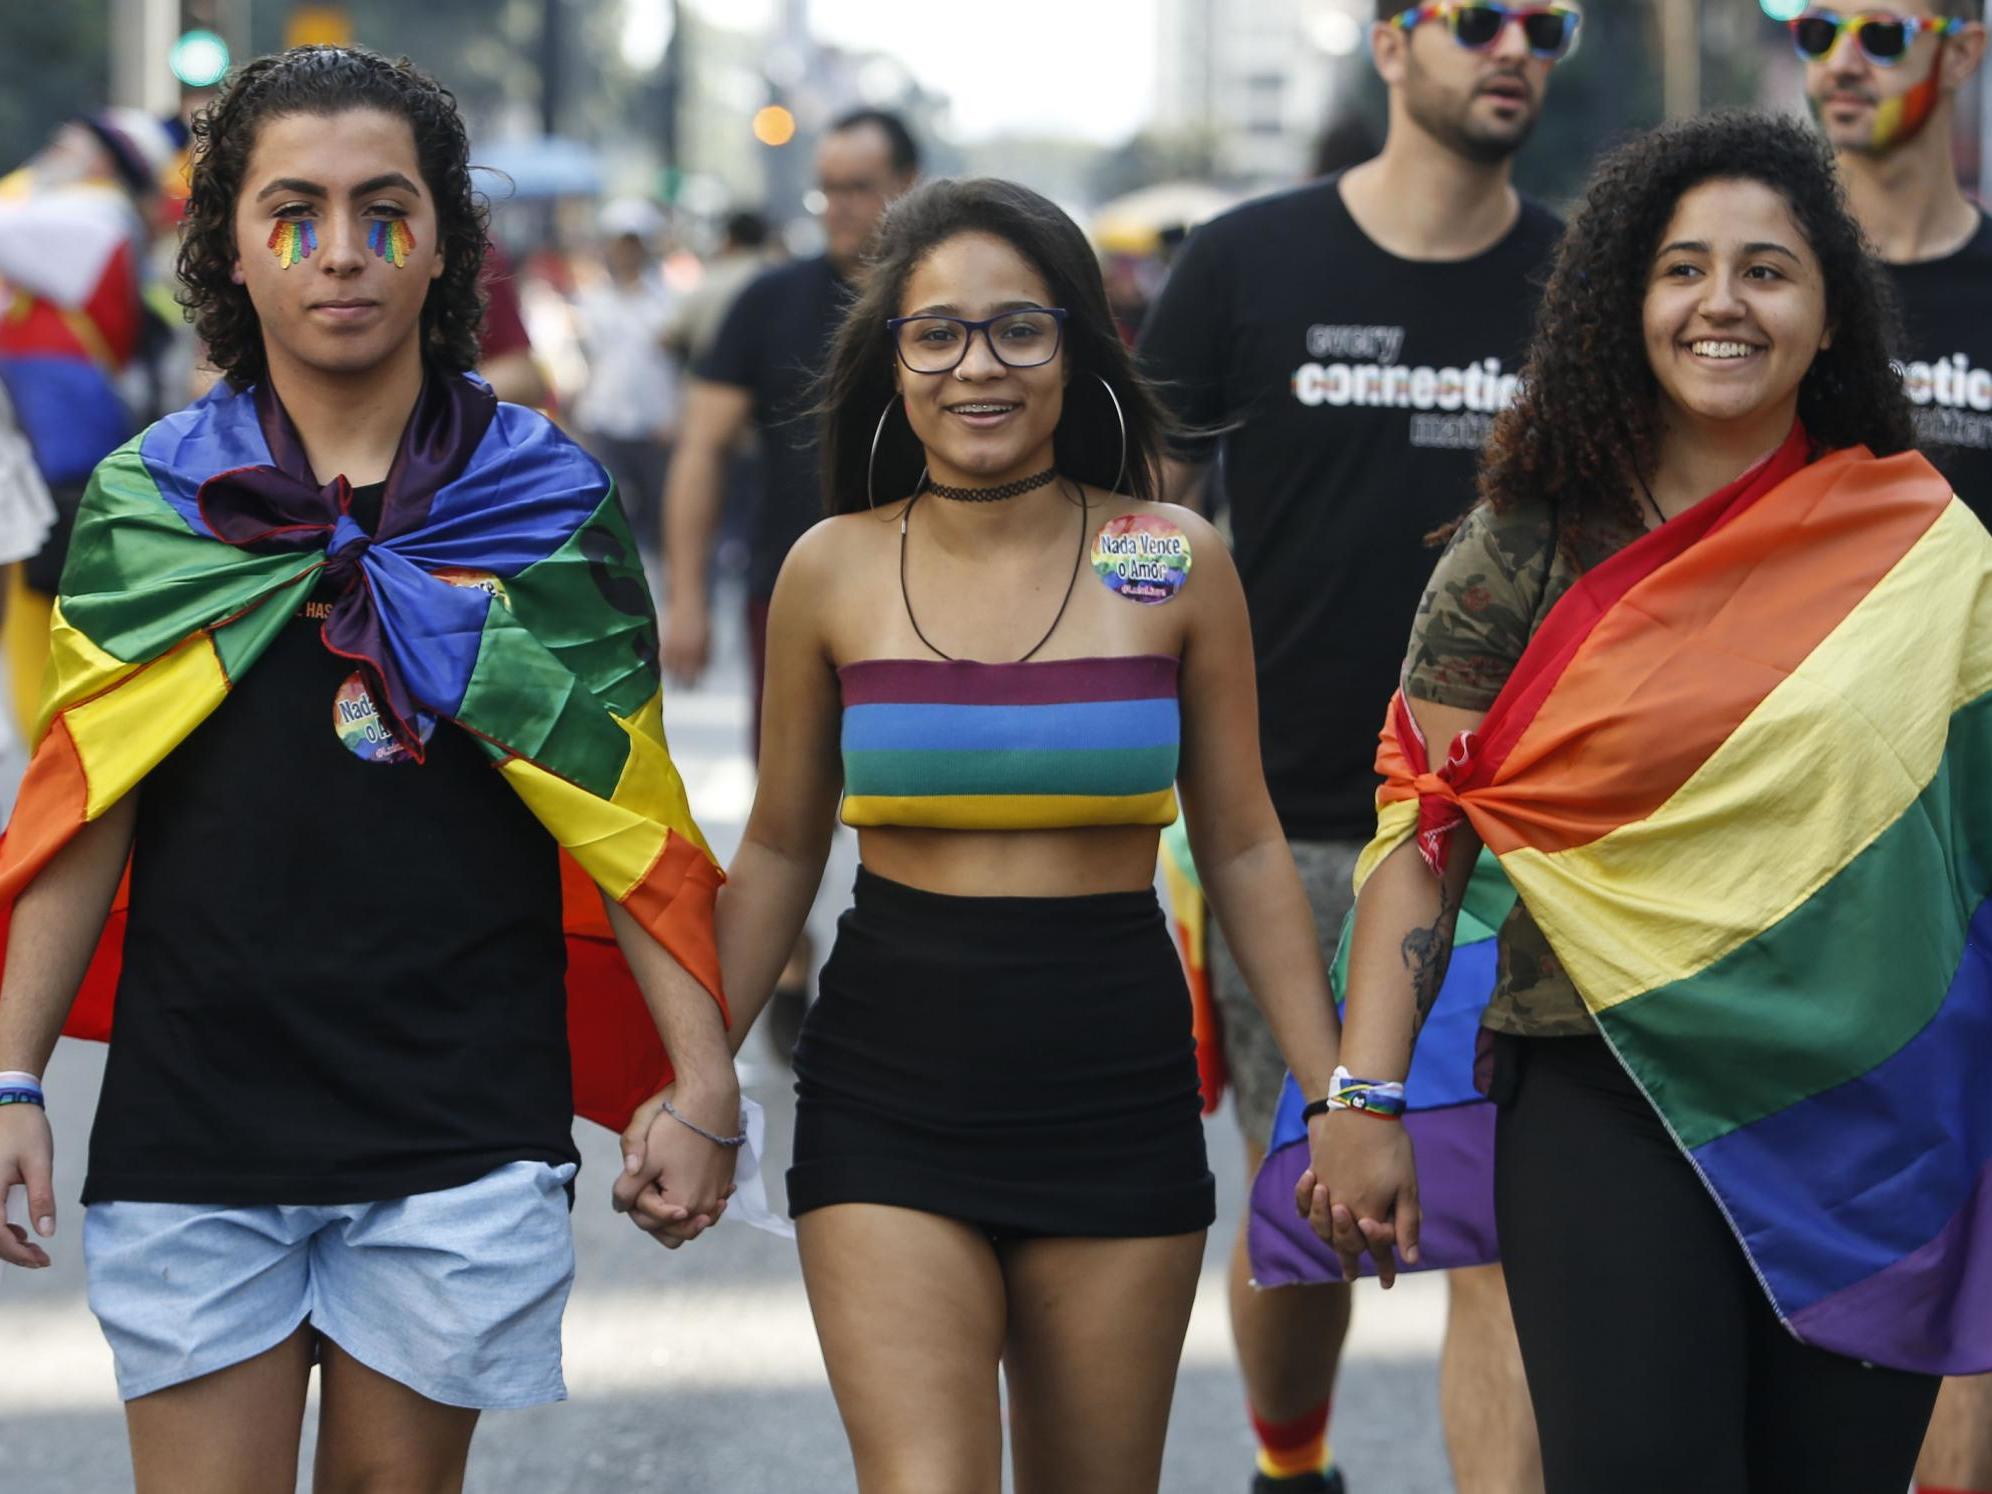 Brazil's LGBT+ community have it tough, but their struggle is only making them louder